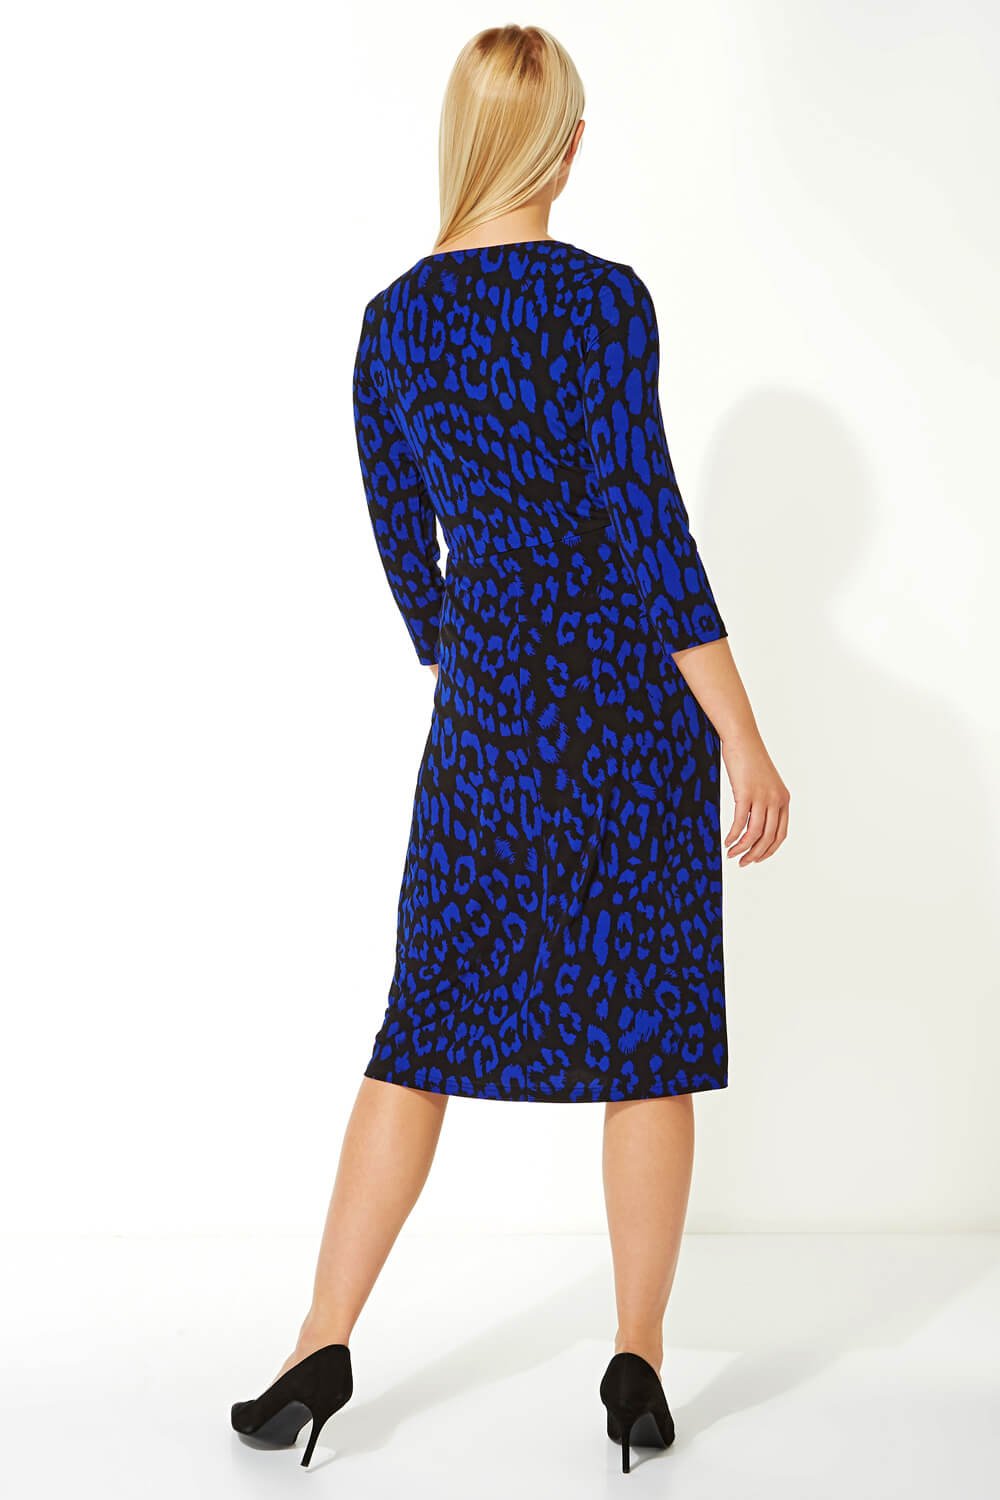 Royal Blue Leopard Print Fit And Flare Dress, Image 3 of 5